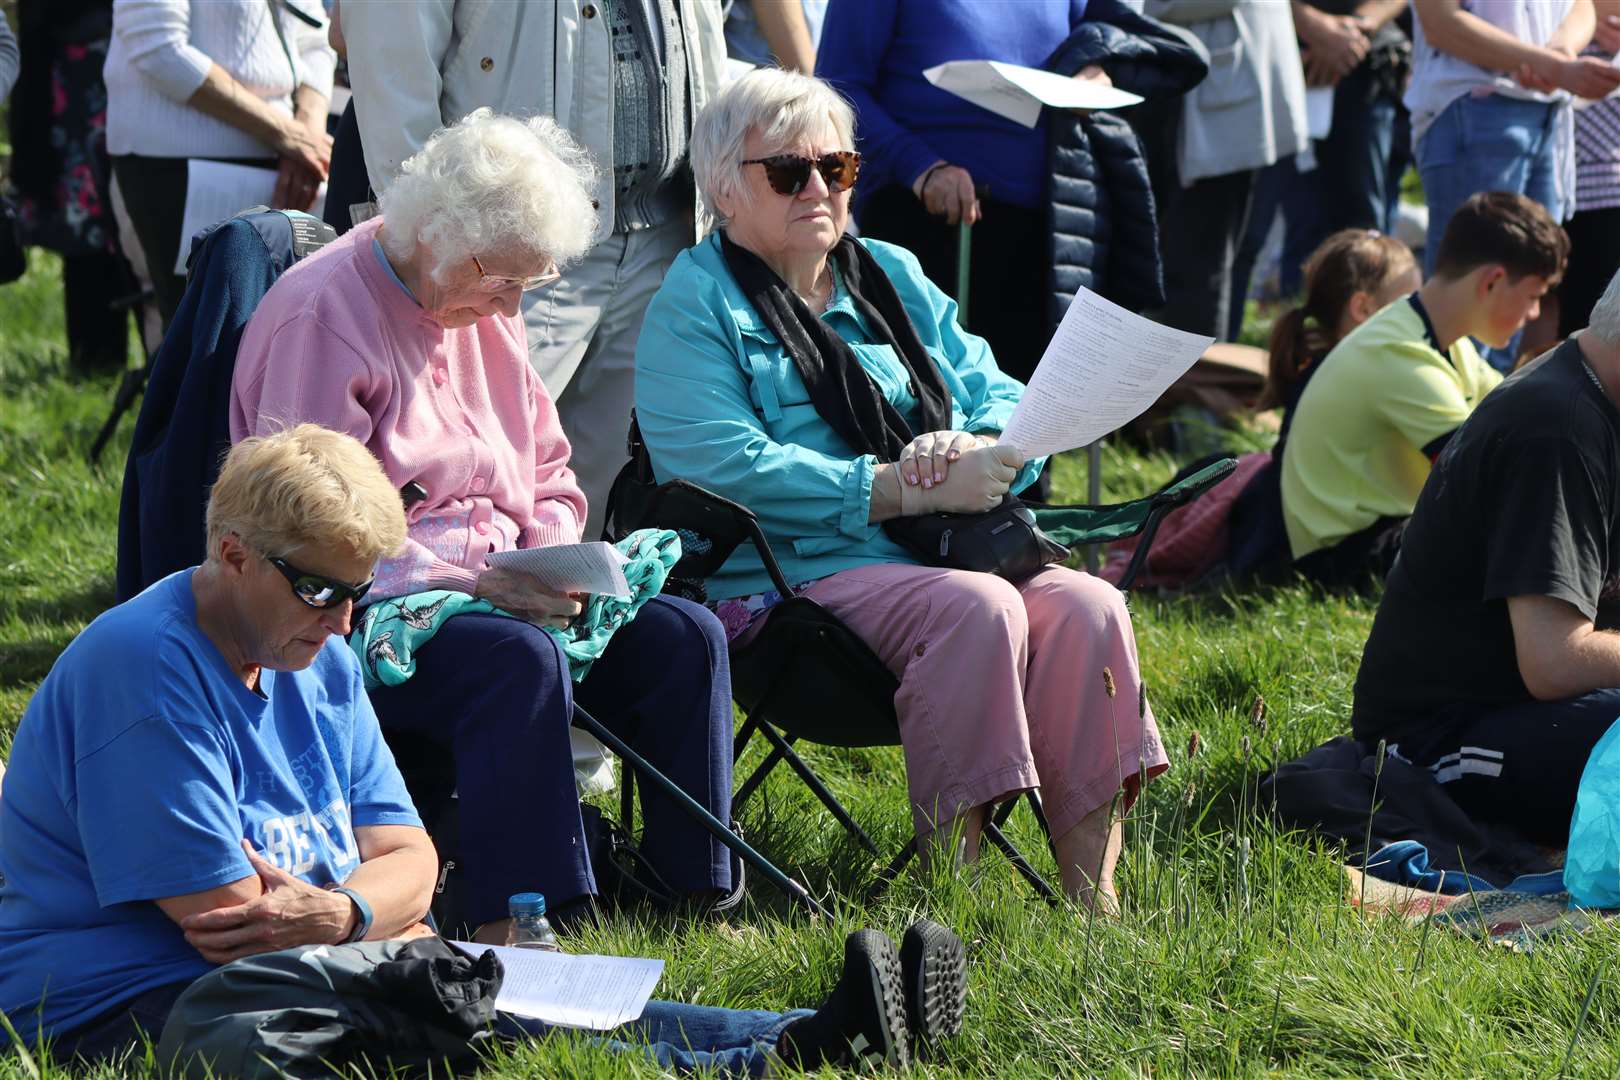 Some of the crowd at Sheppey's traditional Good Friday Easter service